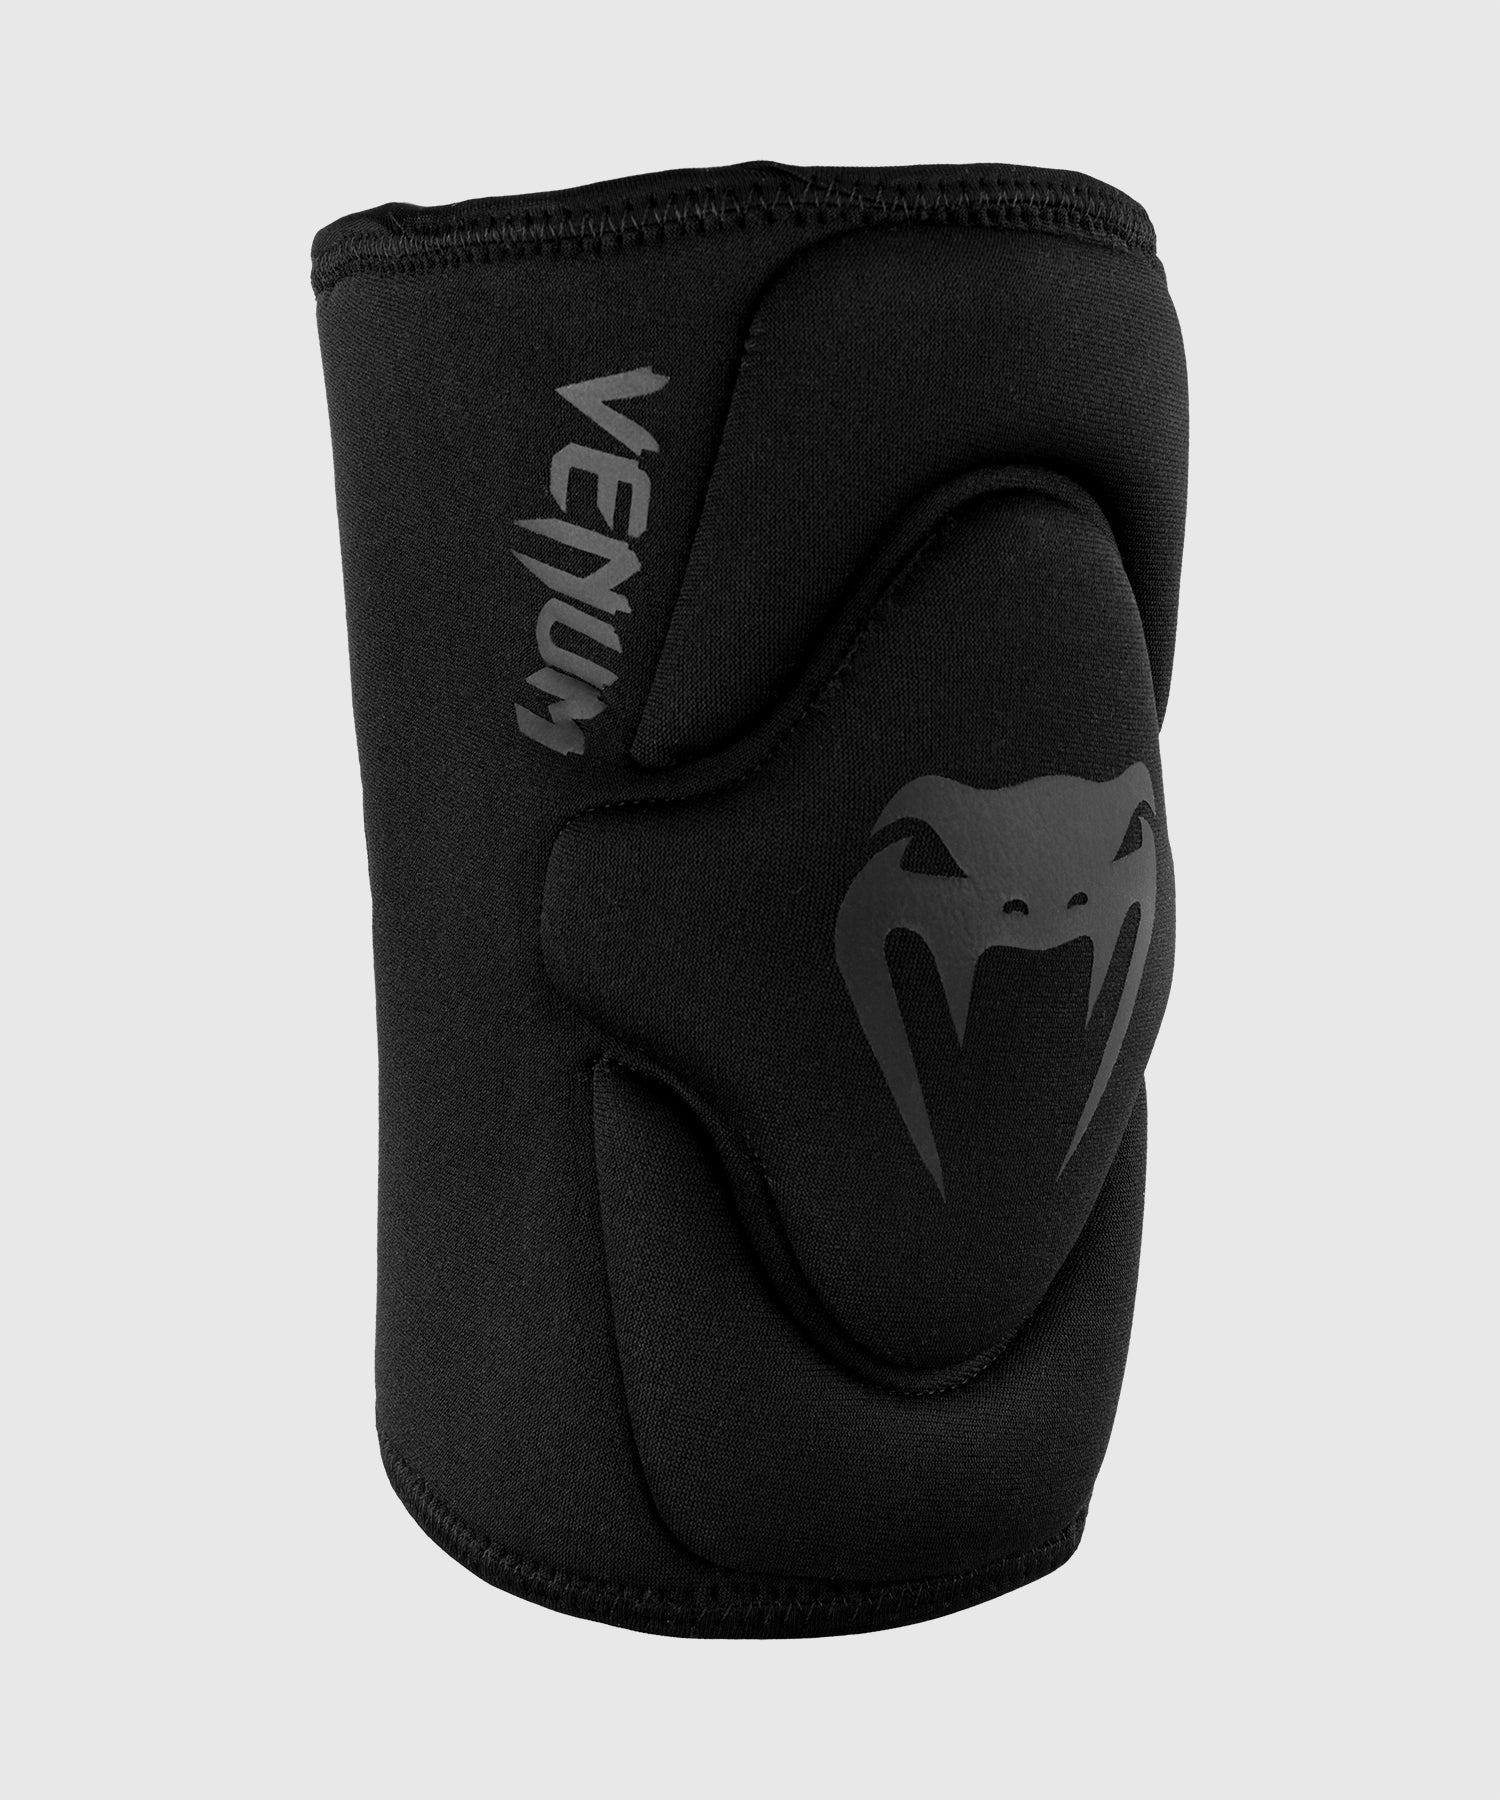 Elbow, knee, ankle and wrist protective